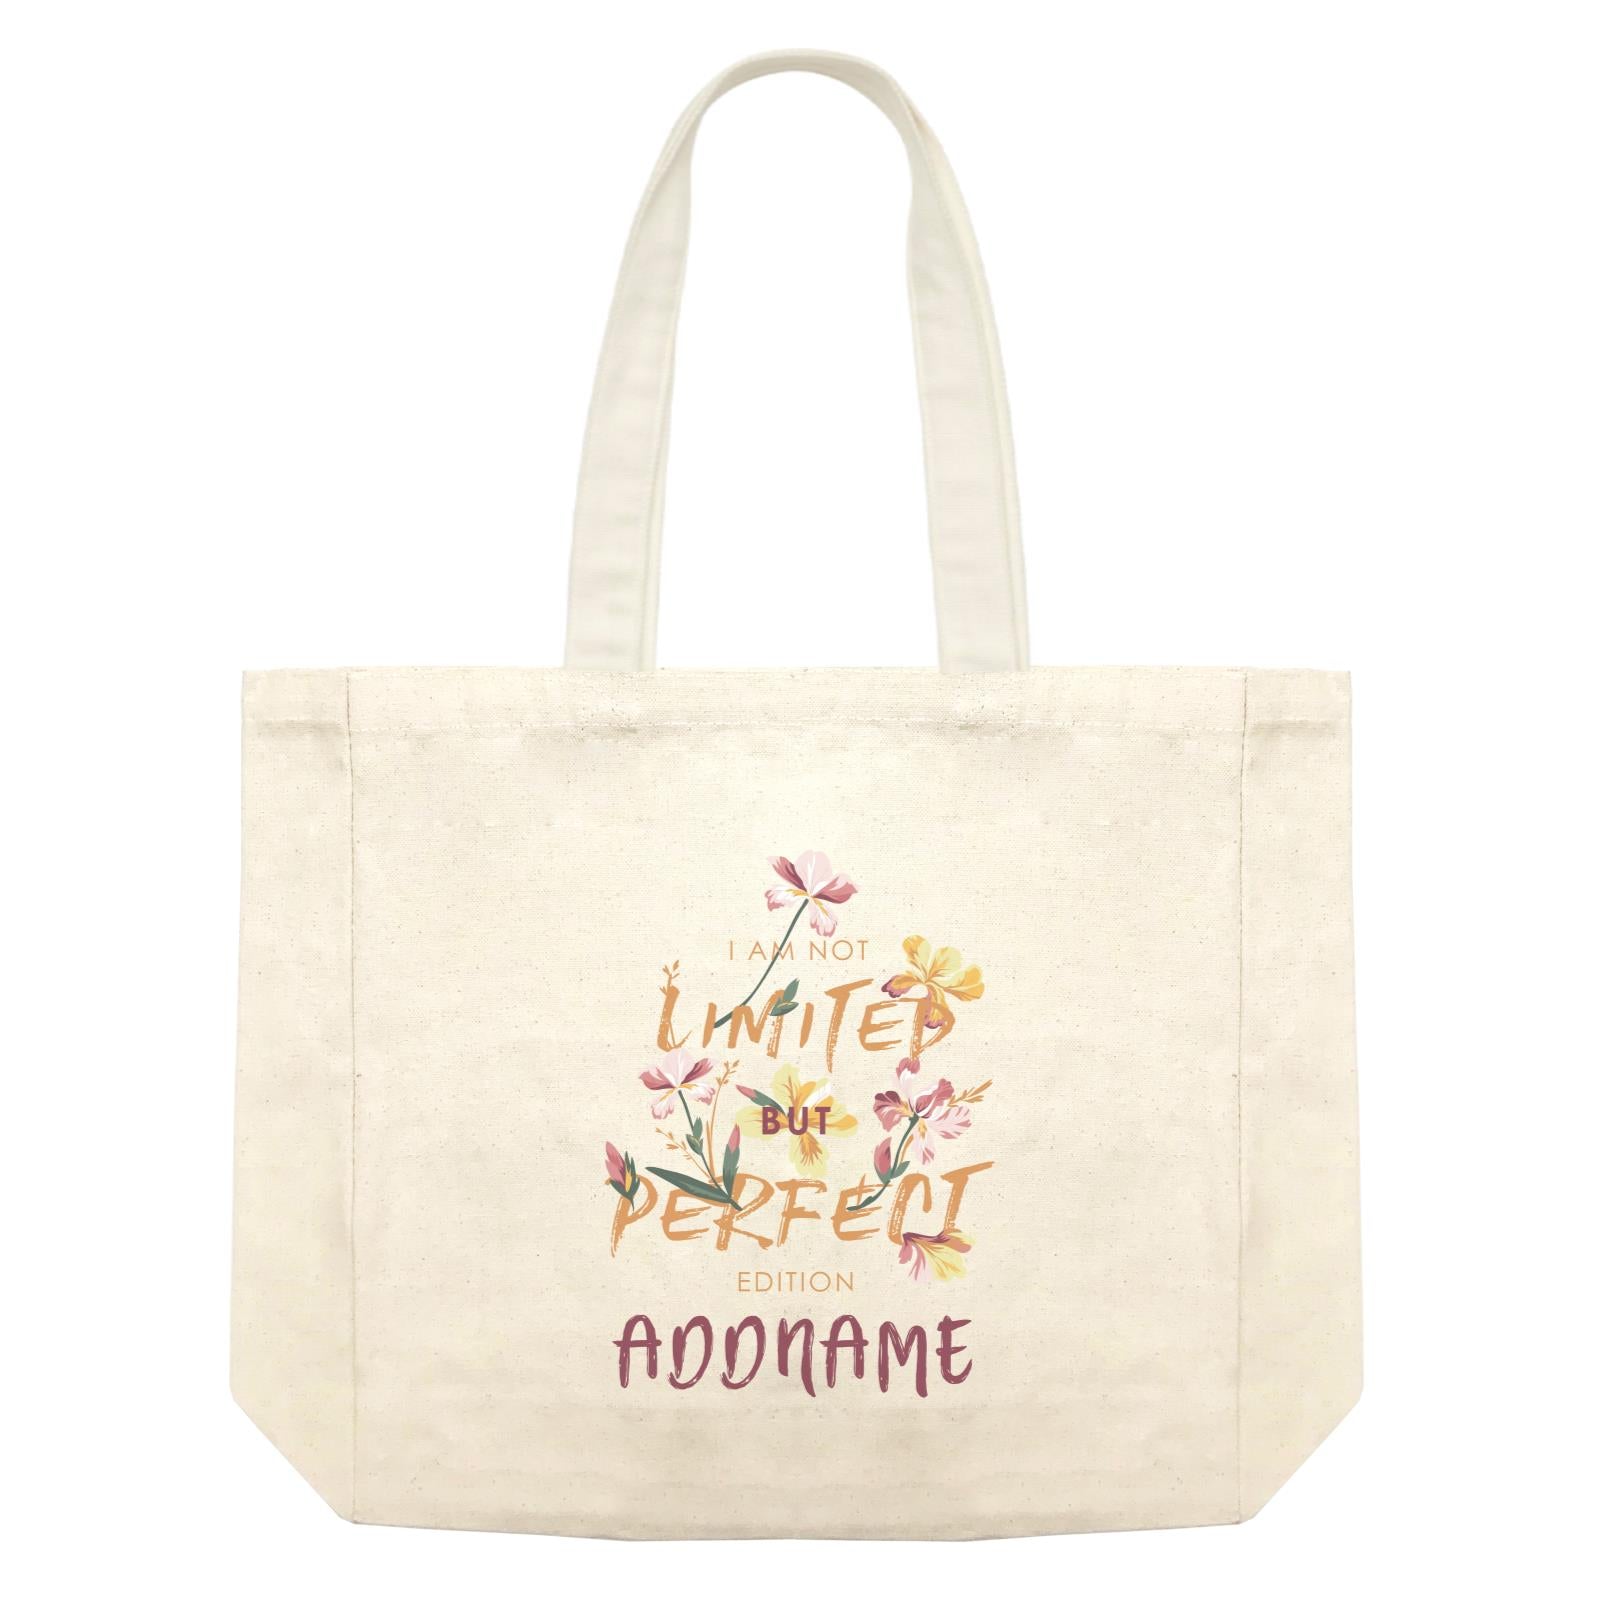 Cool Chic Flowers I'm not Limited But Perfect Edition With Addname Shopping Bag